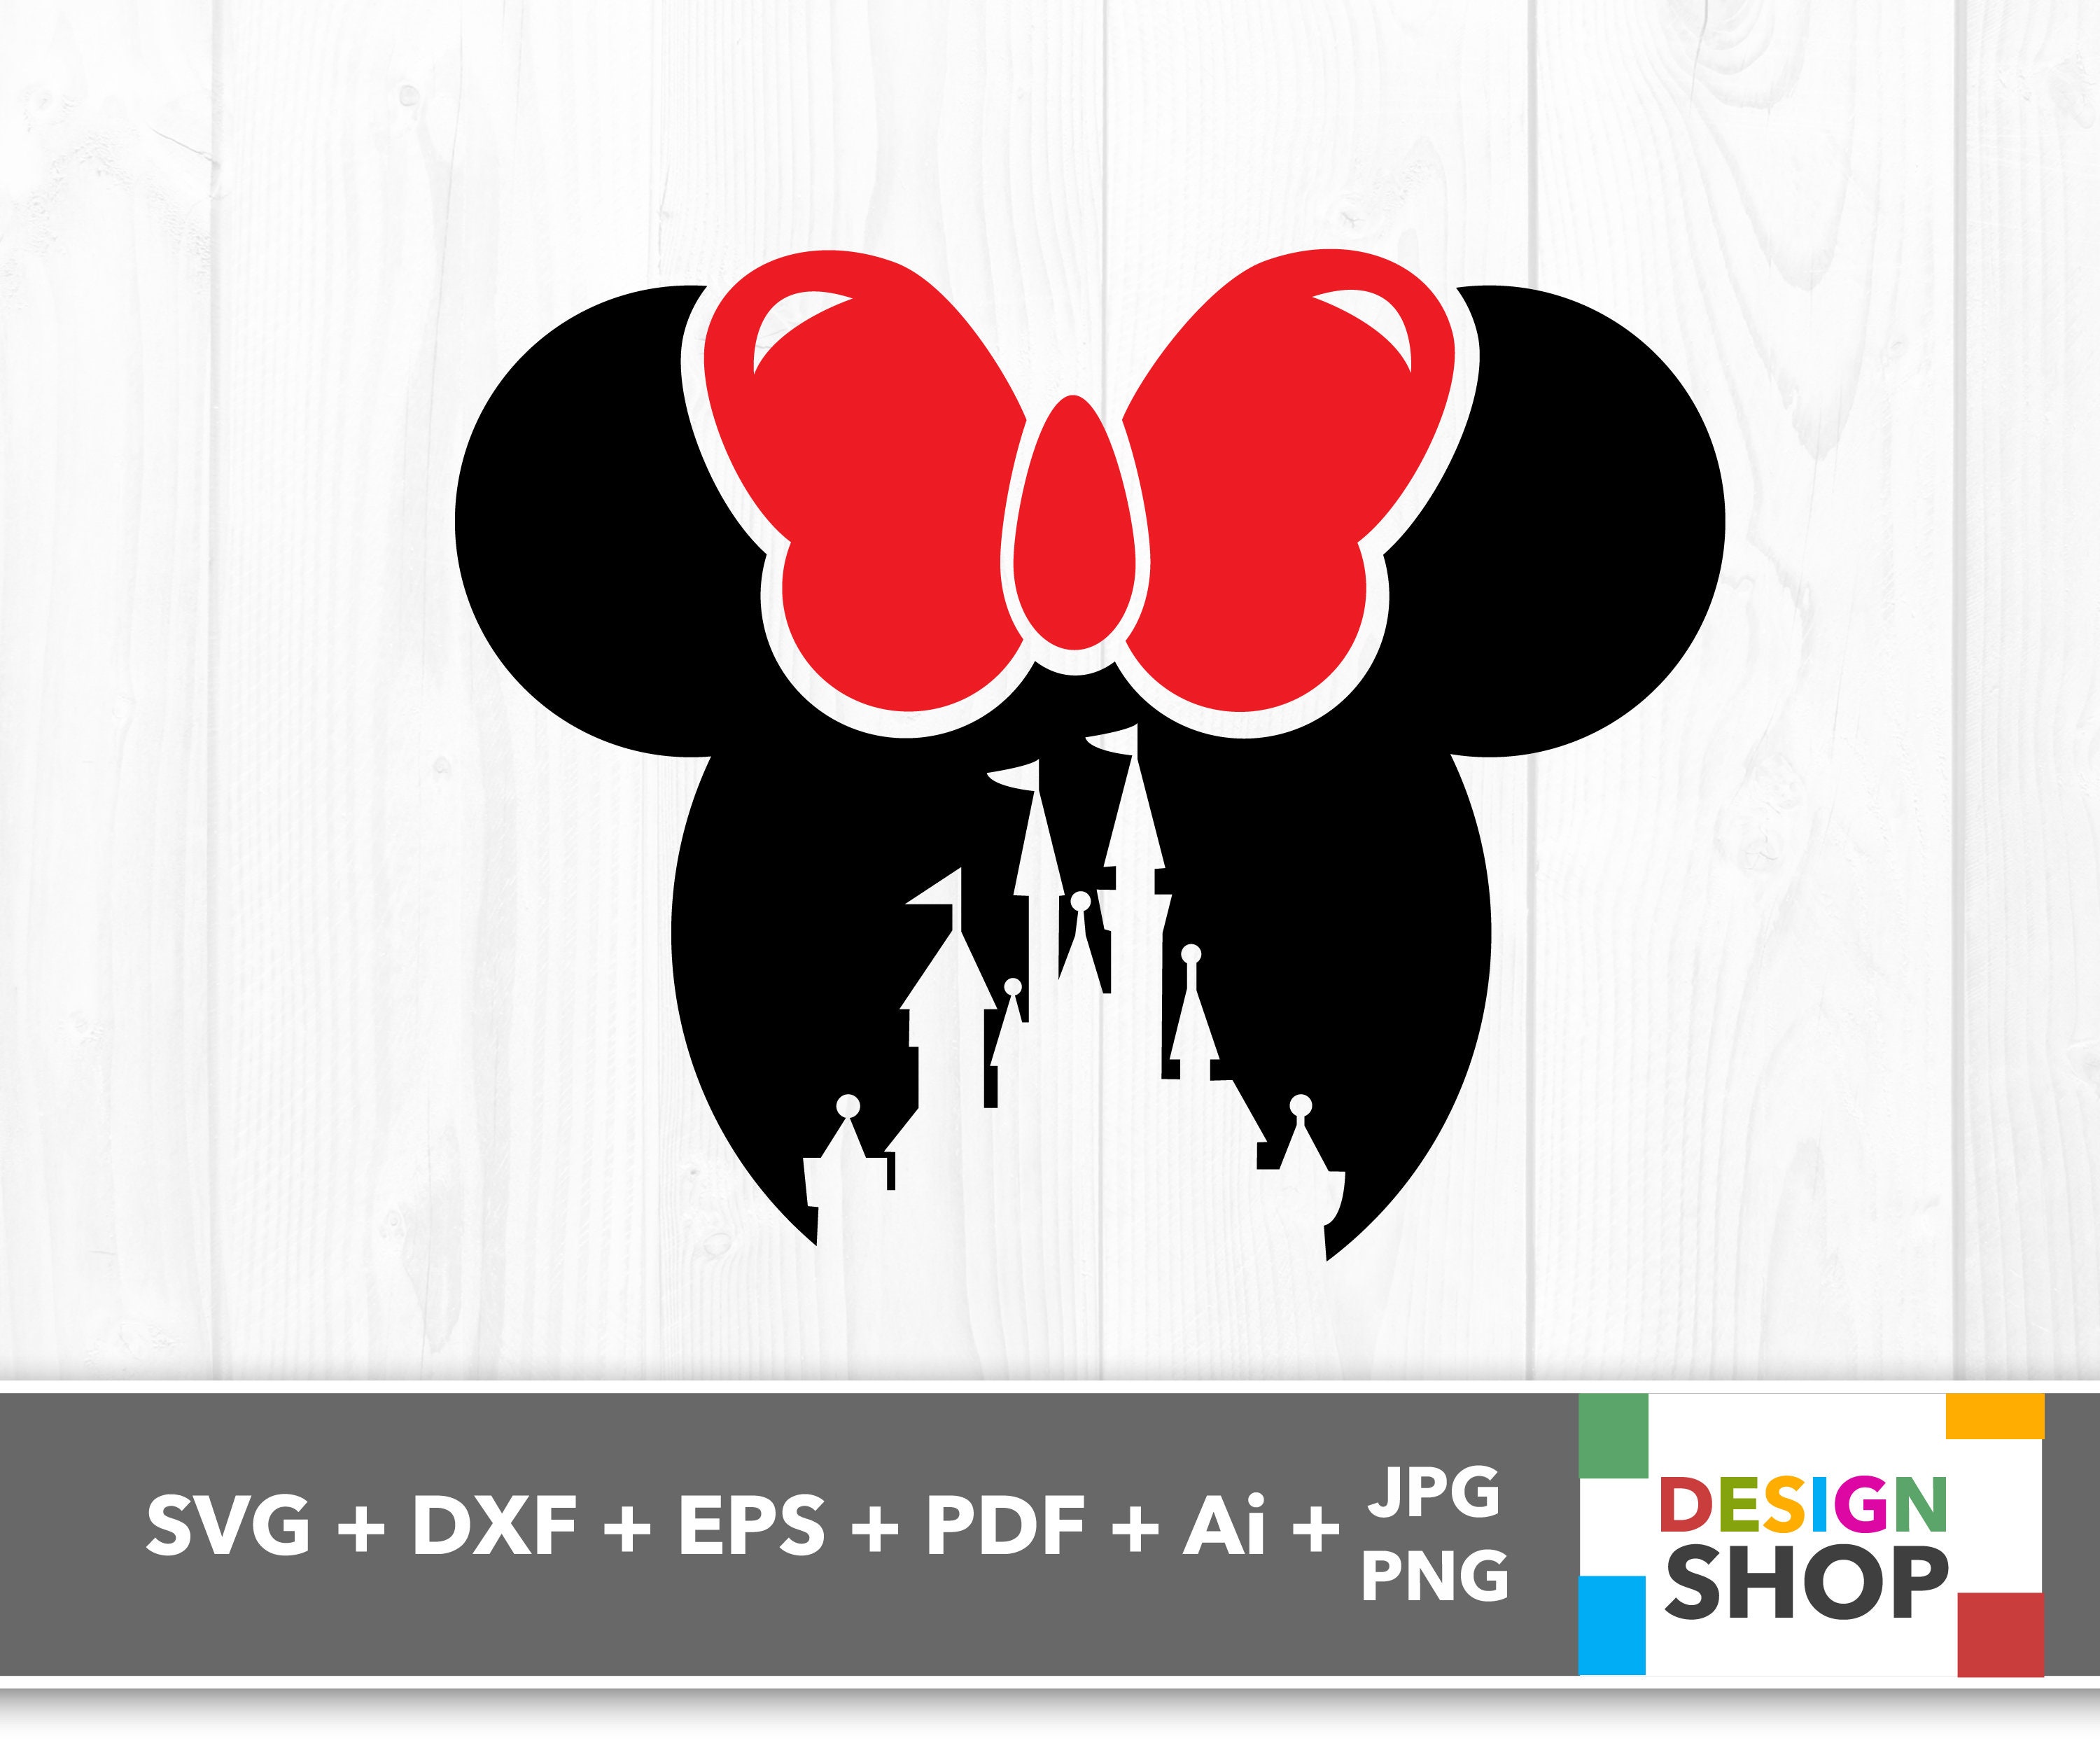 Download Louis Vuitton Logo Svg Free for Cricut, Silhouette, Brother Scan N Cut Cutting Machines